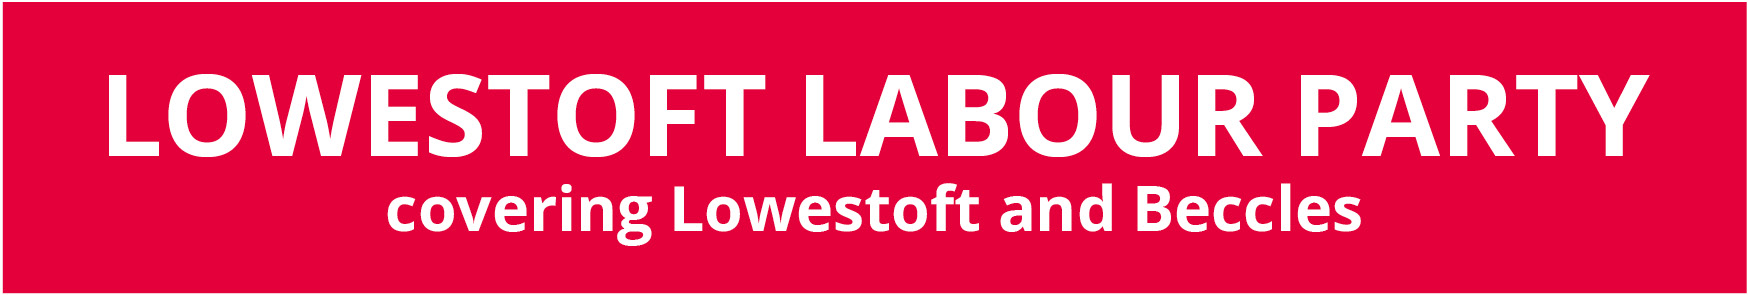 Lowestoft Labour Party covering Lowestoft and Beccles